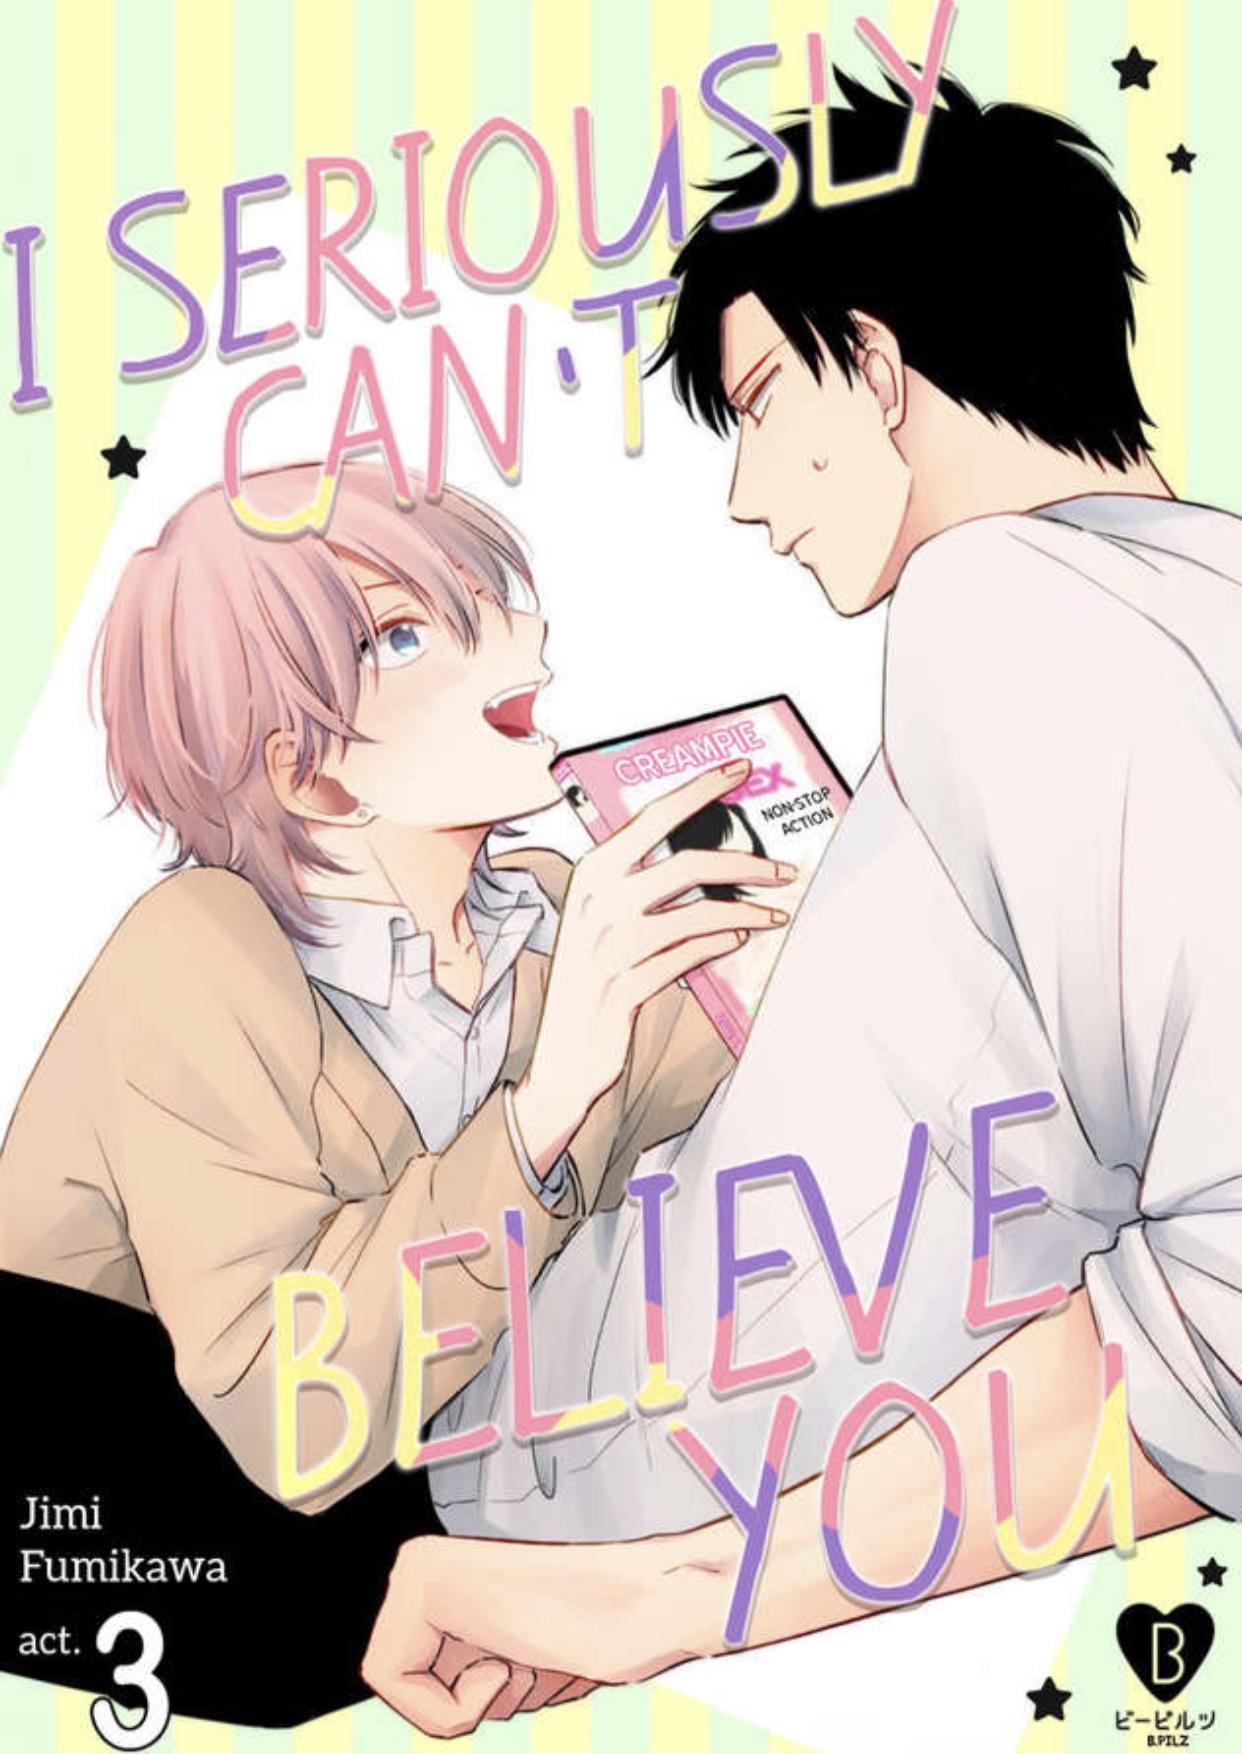 I Seriously Can't Believe You... Ch.3